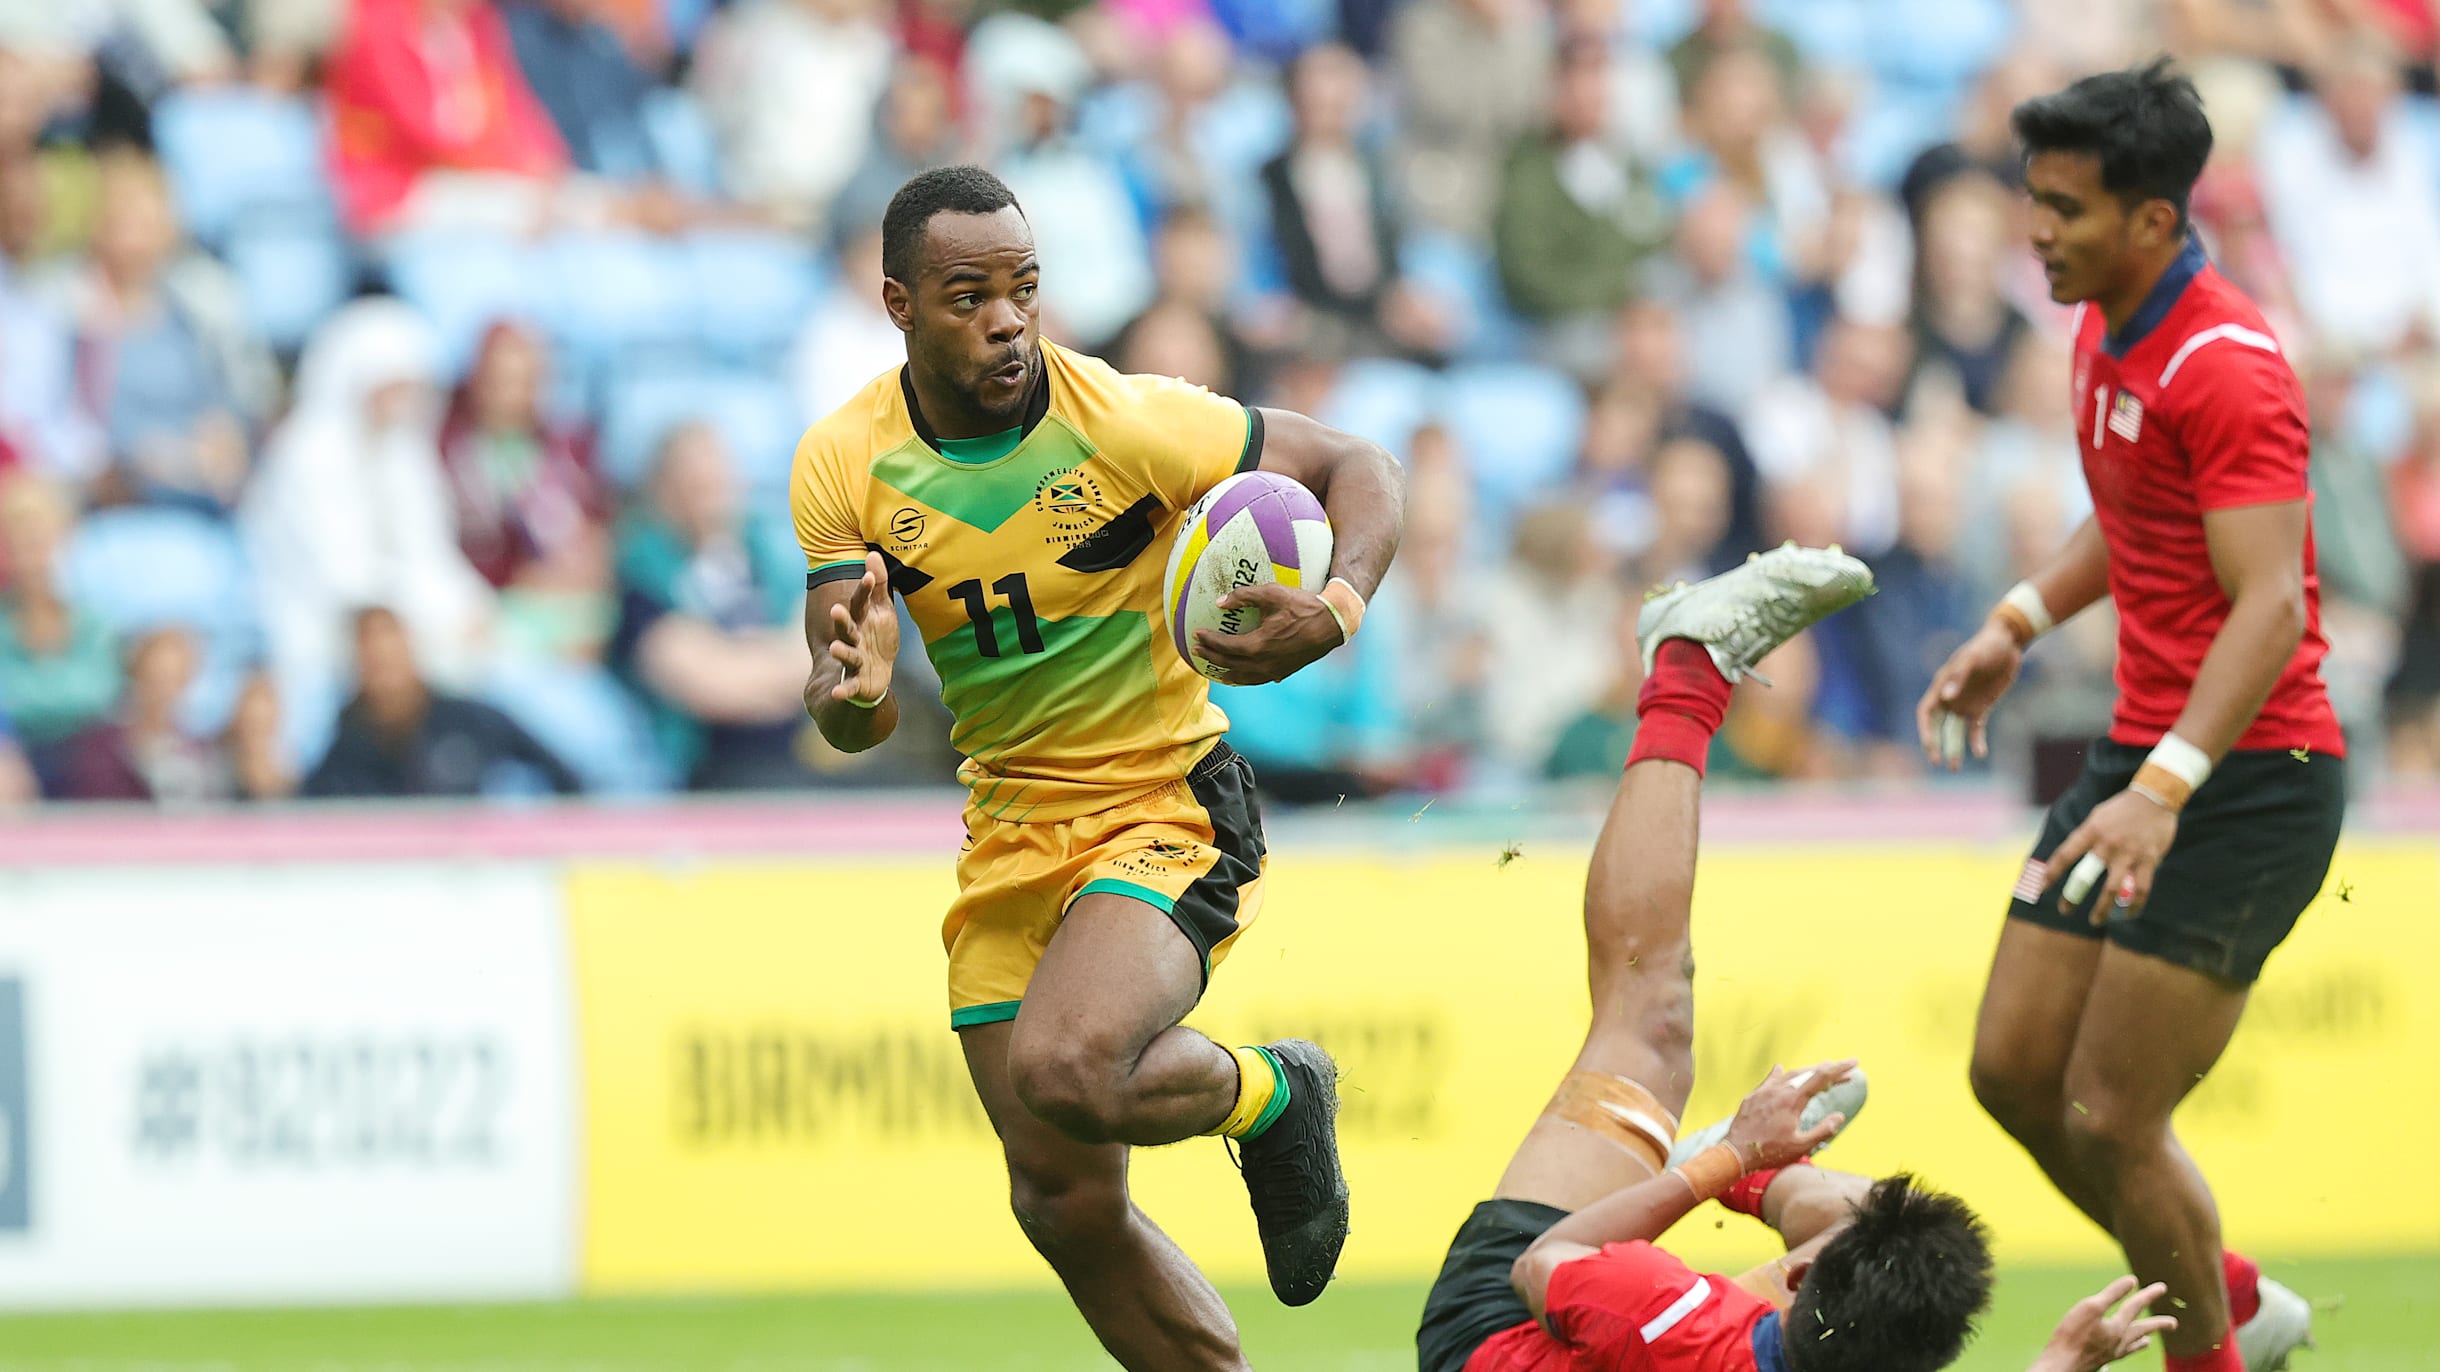 Jamaica Rugby 7s Rises From the Ashes